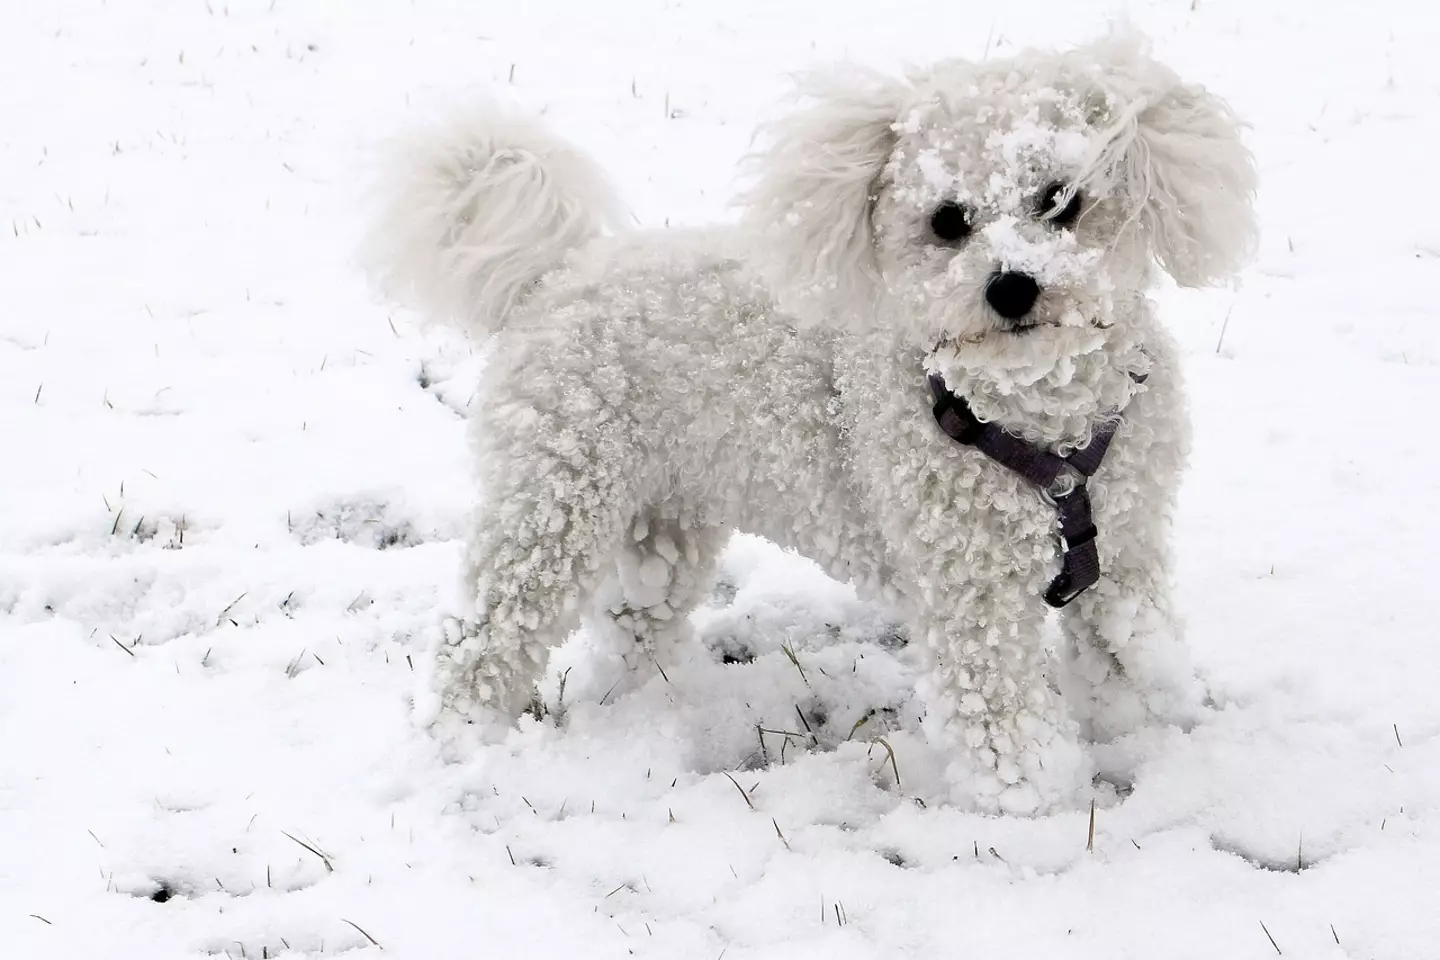 There are things you can do to make walkies safer in cold weather, though.